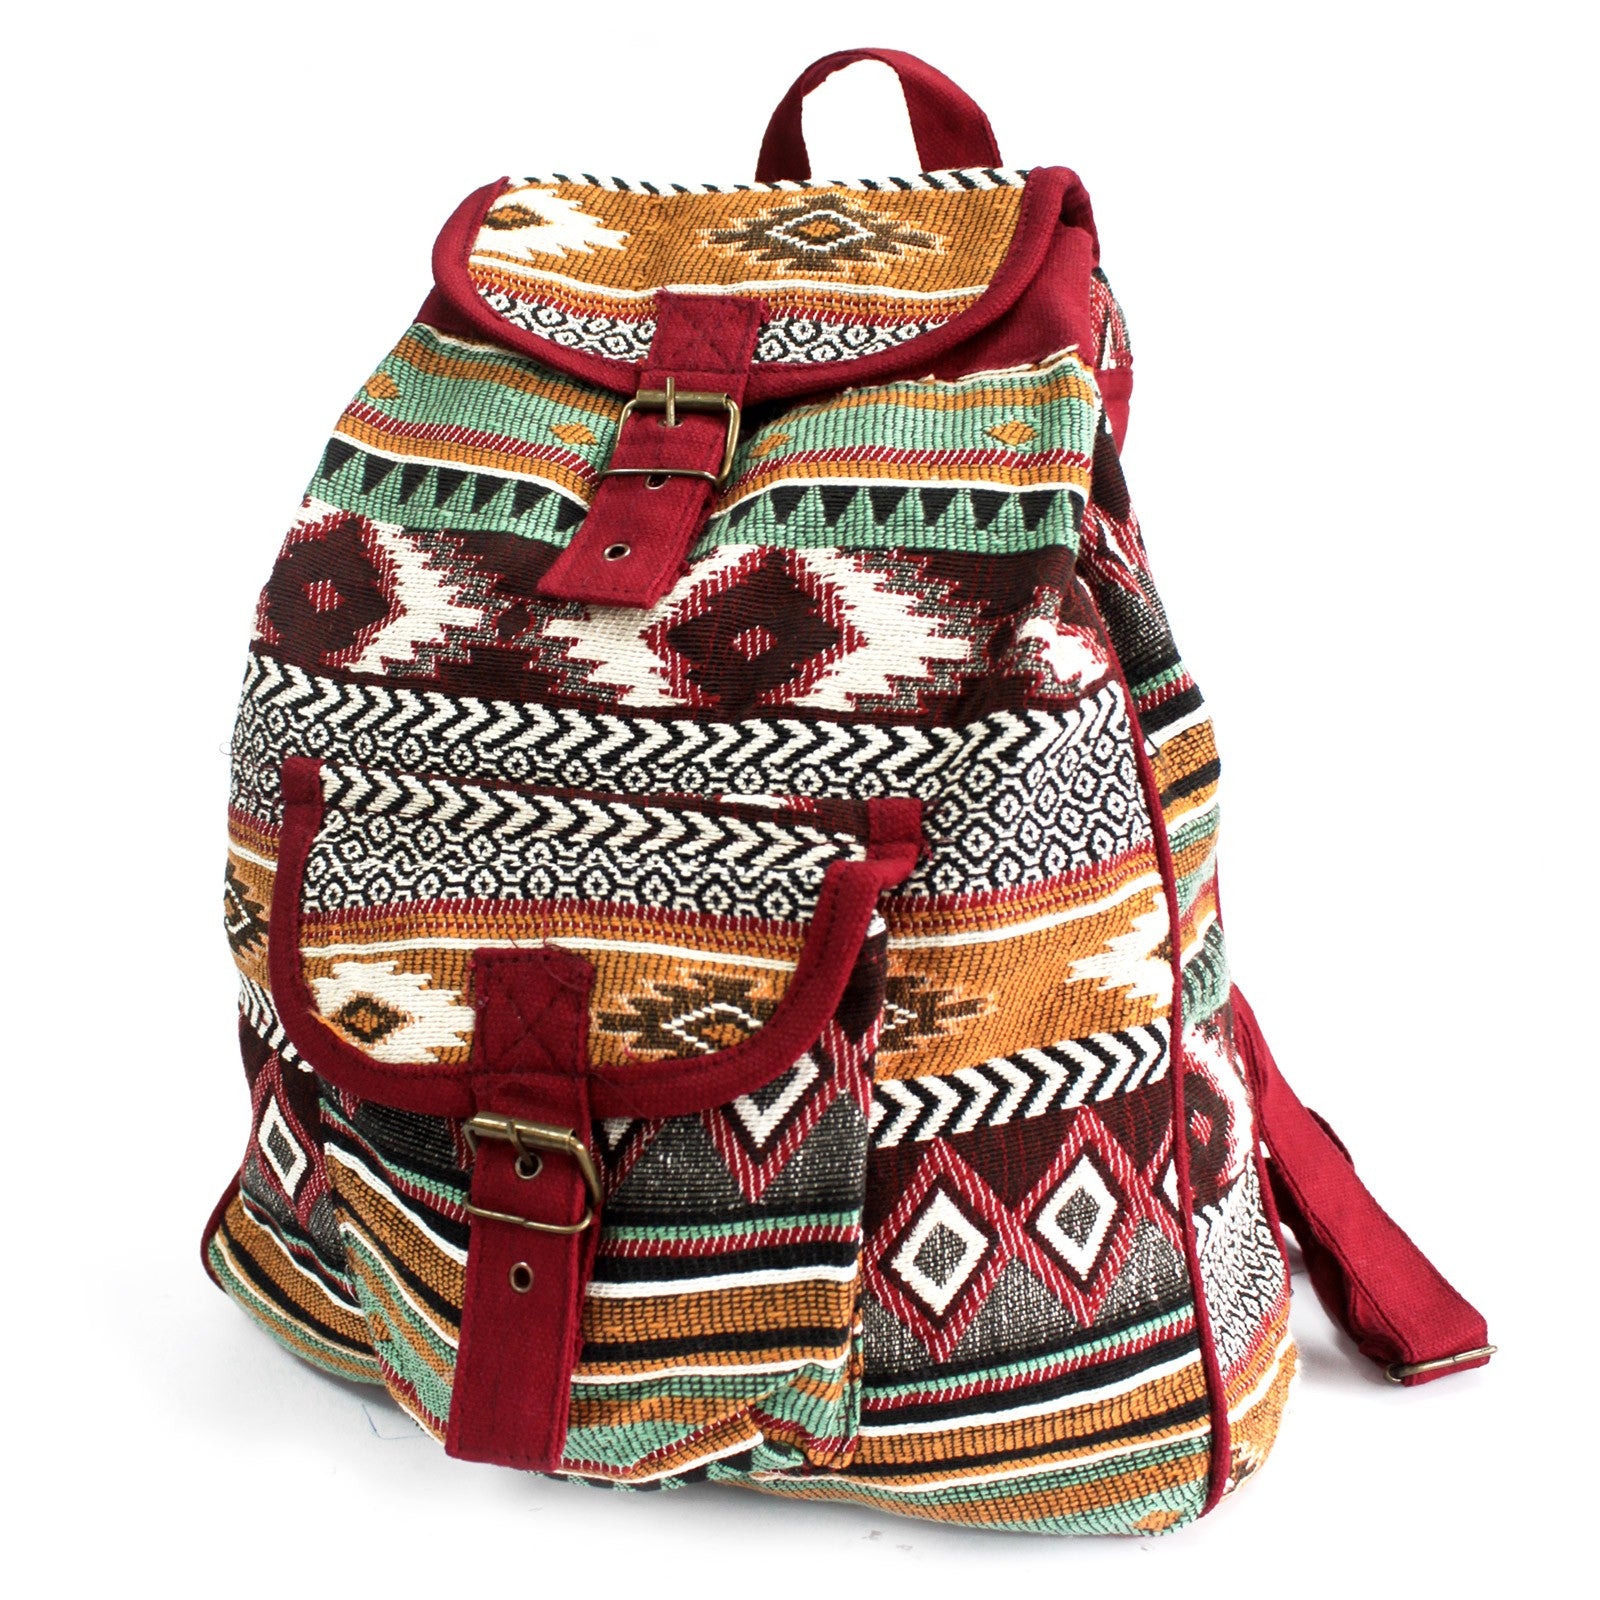 View Jacquard Bag Chocolate Backpack information